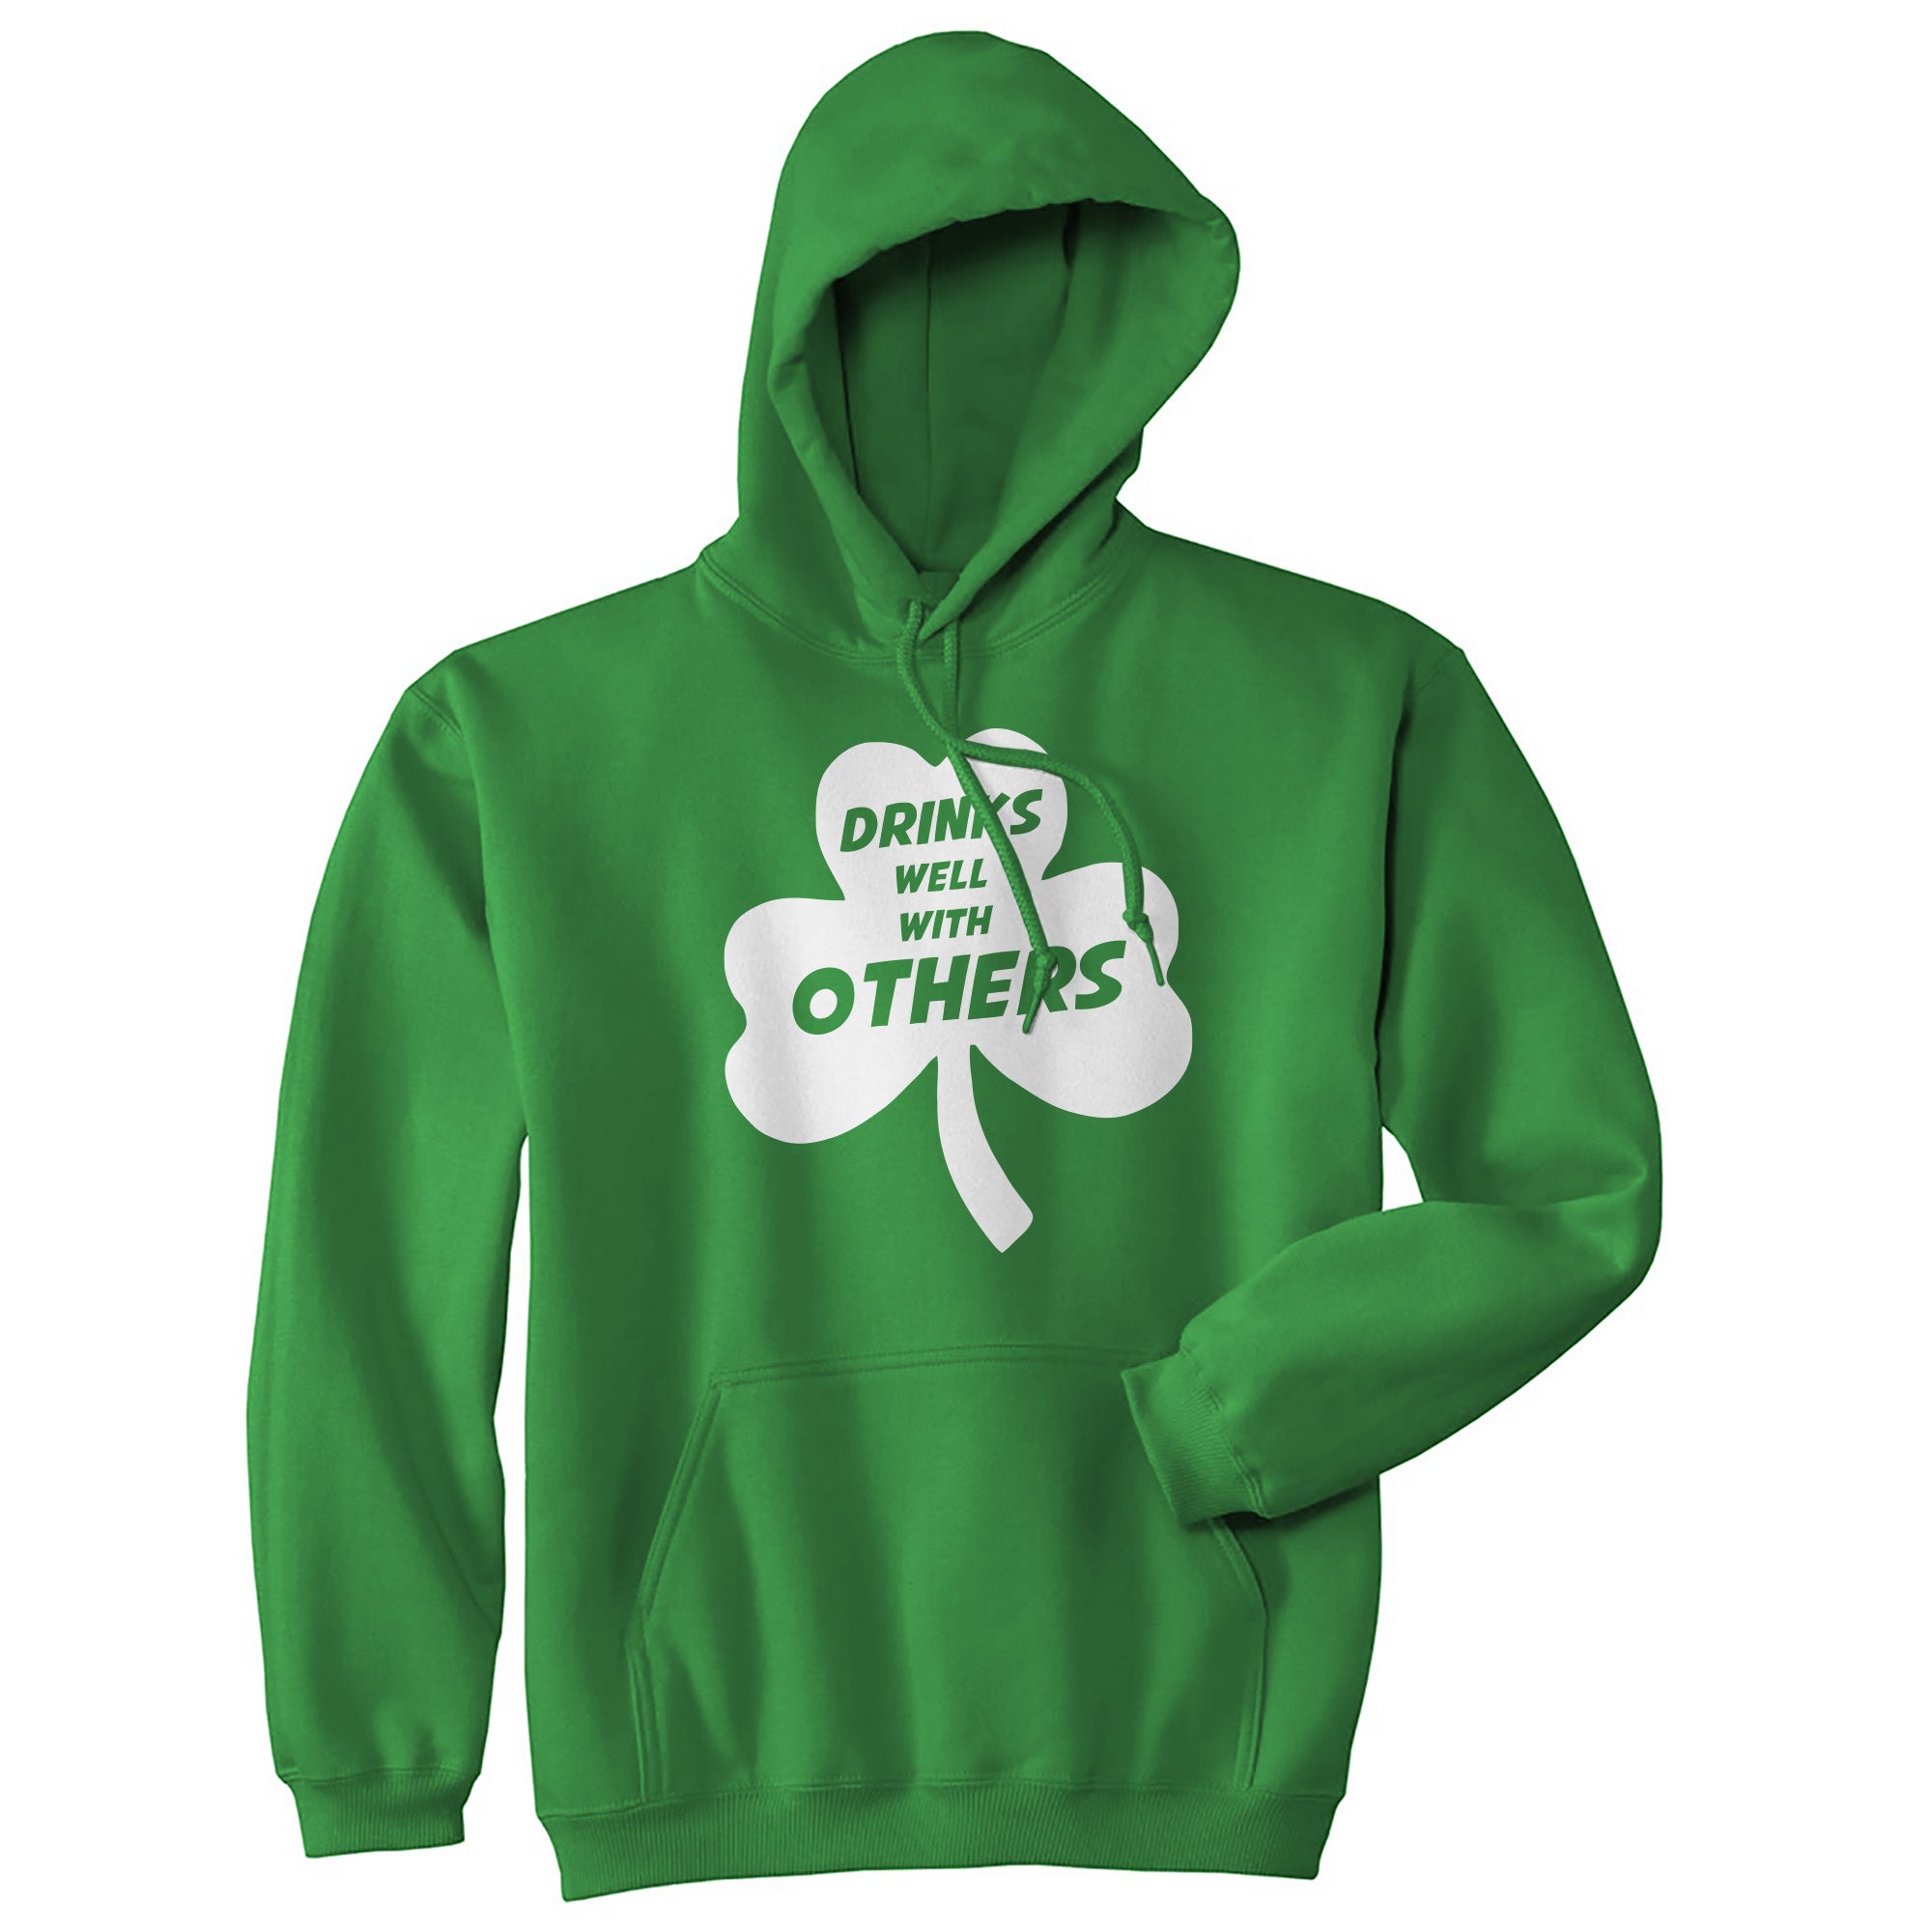 Funny Green - Drinks Well Drinks Well With Others Hoodie Nerdy Saint Patrick's Day Drinking Tee